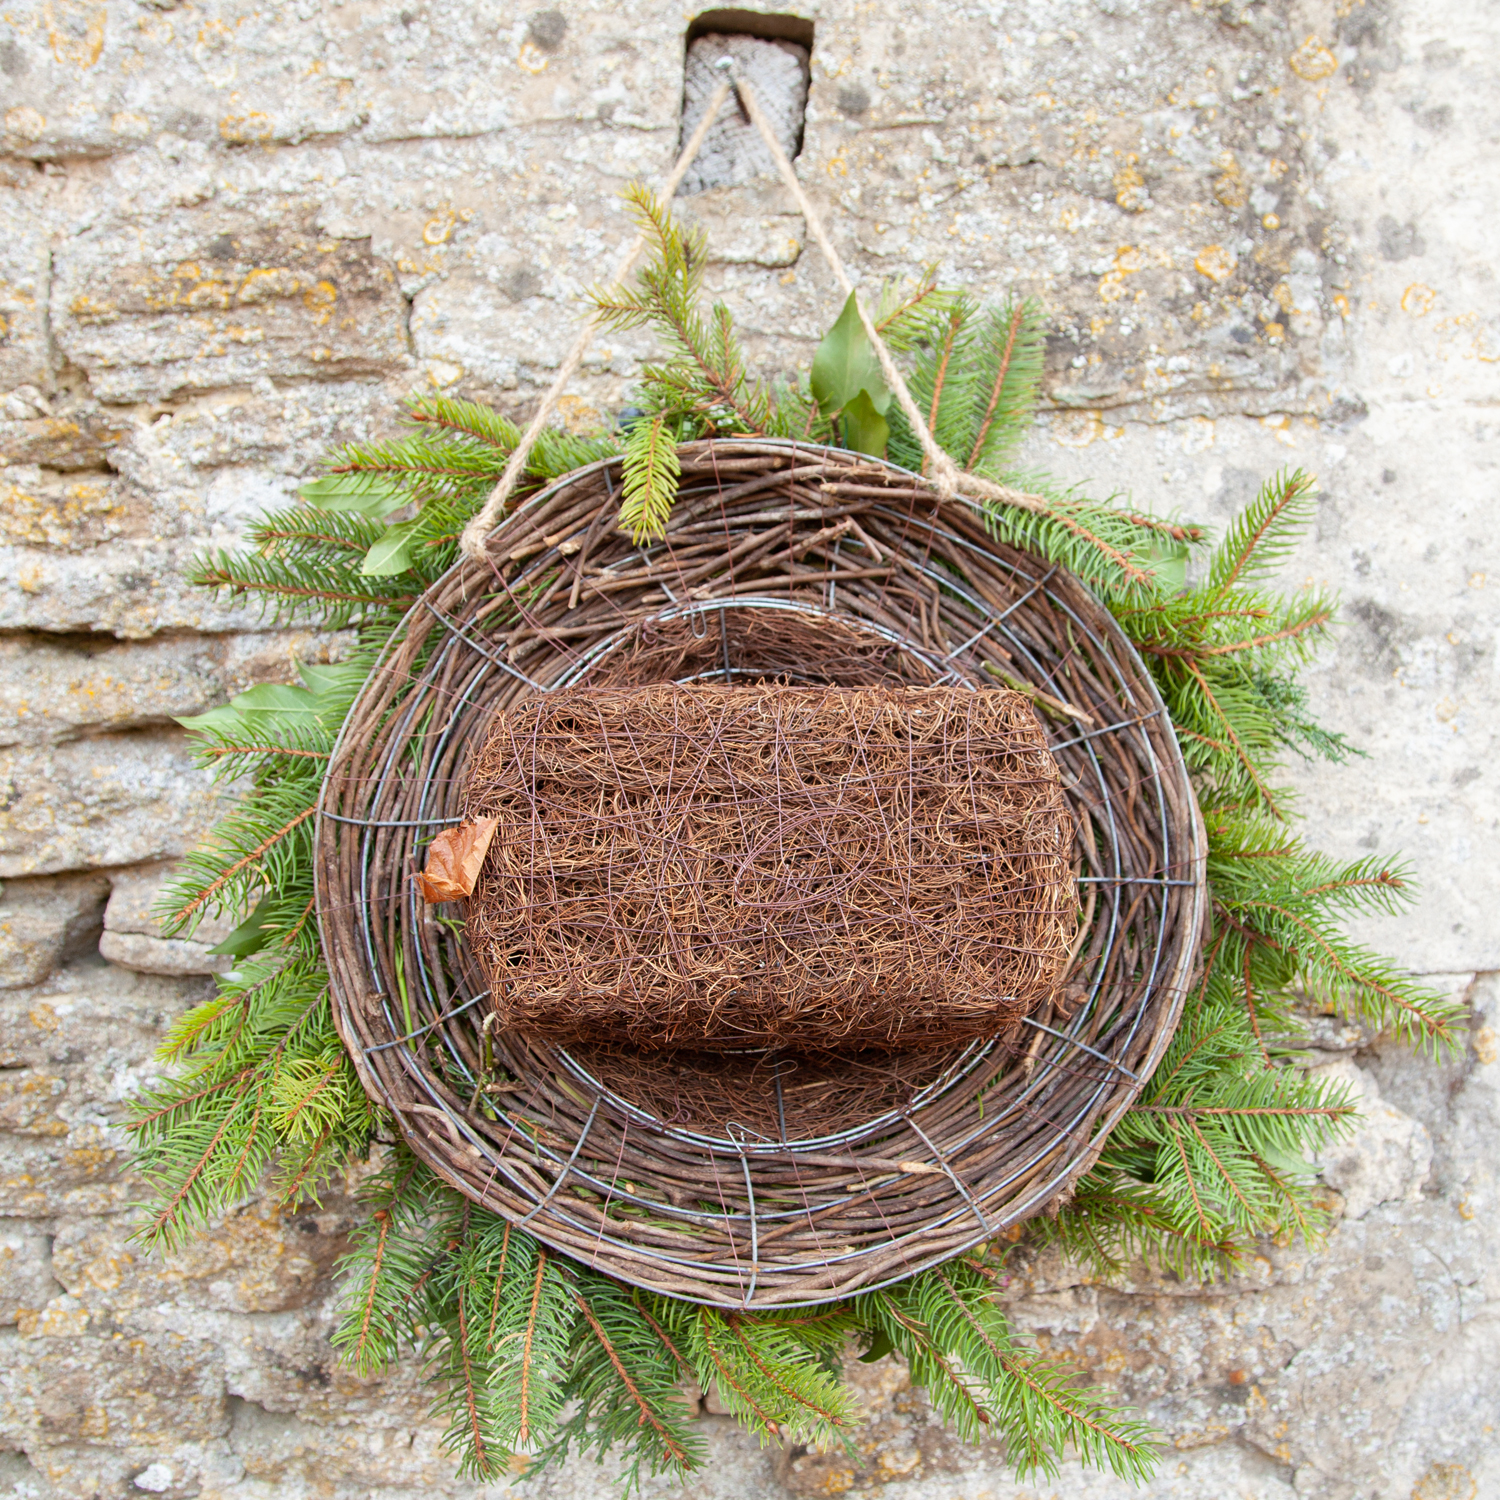 Back of wreath shown hung on a stone wall. Wreath is made of brushwood and foliage. Back of wreath shows rectangular nest box.